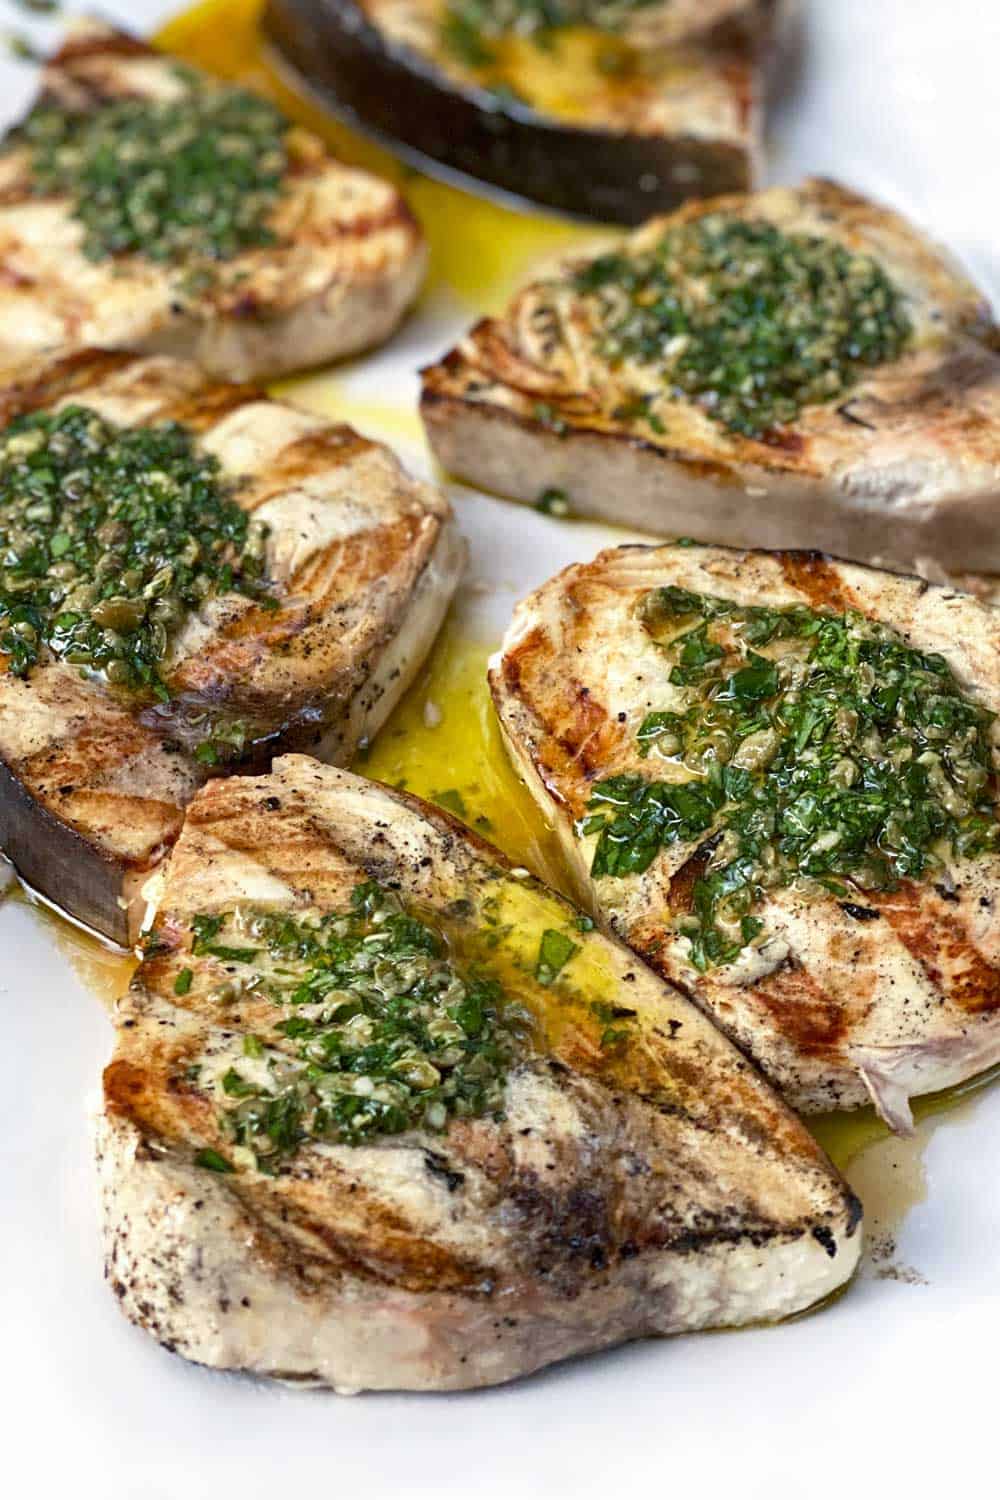 5 grilled swordfish steaks topped with green salsa verde